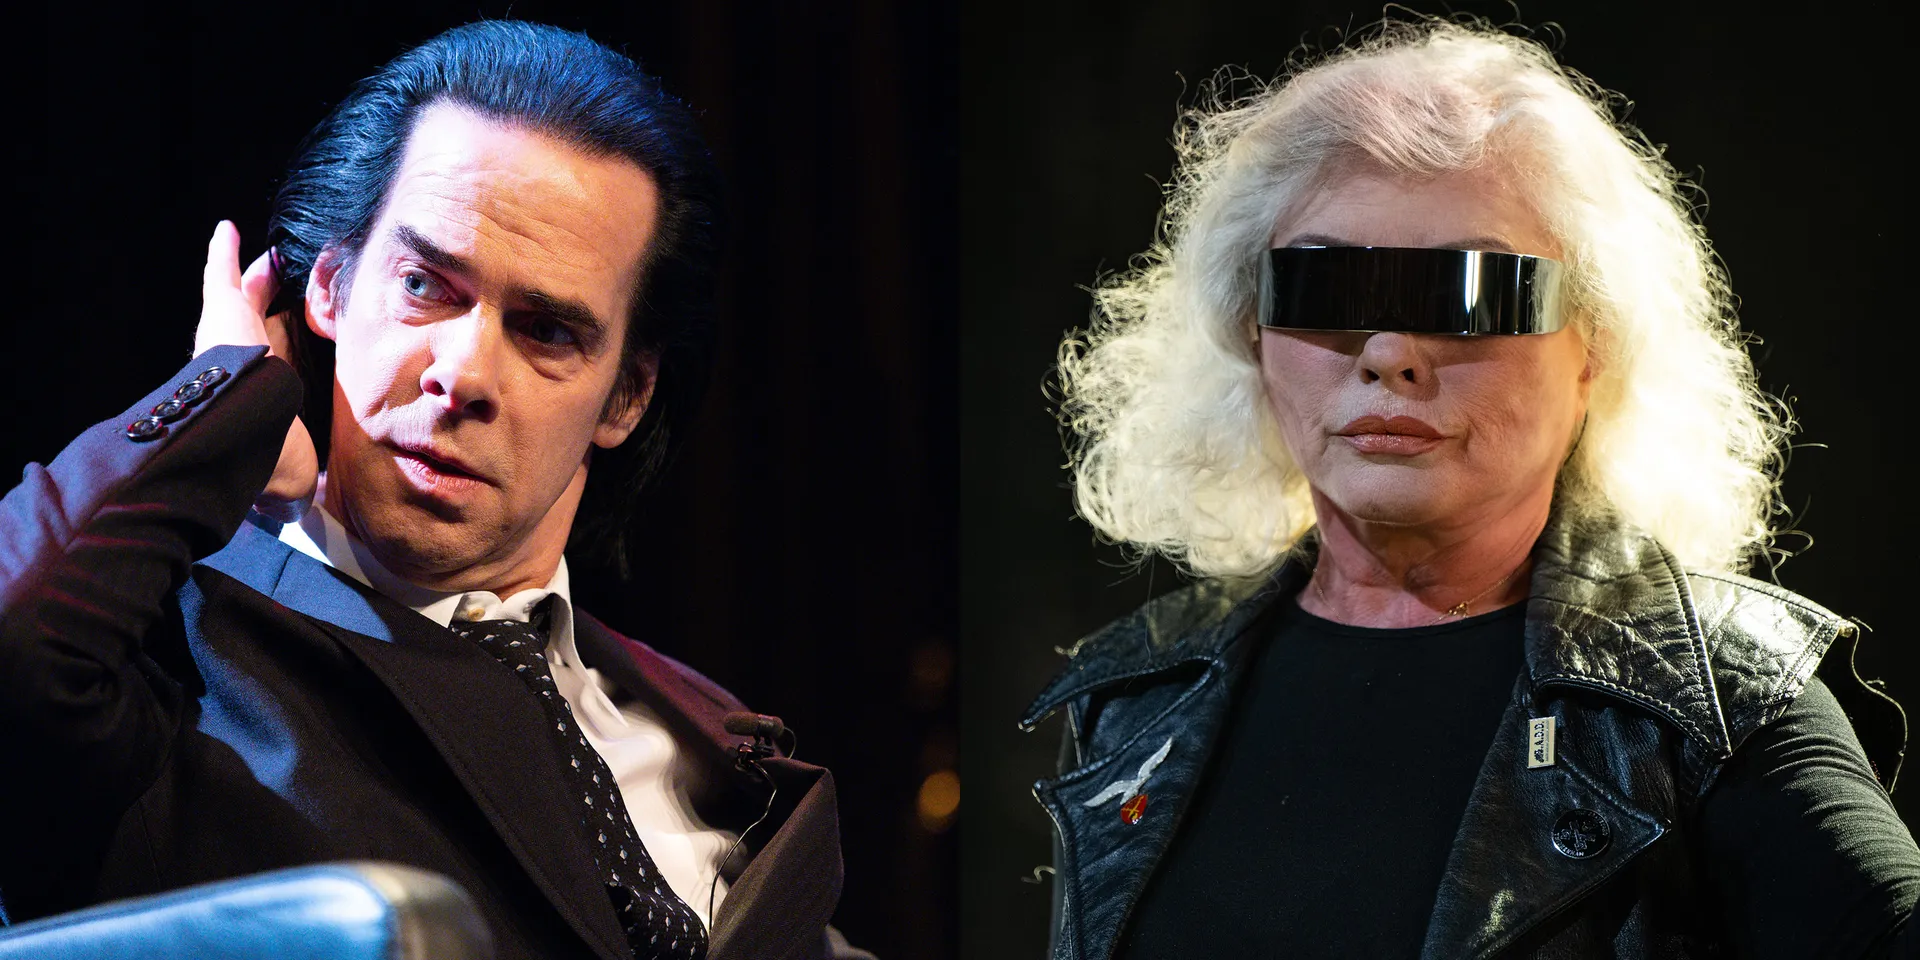 Nick Cave y Debbie Harry presentan cover de ‘On the Other Side’